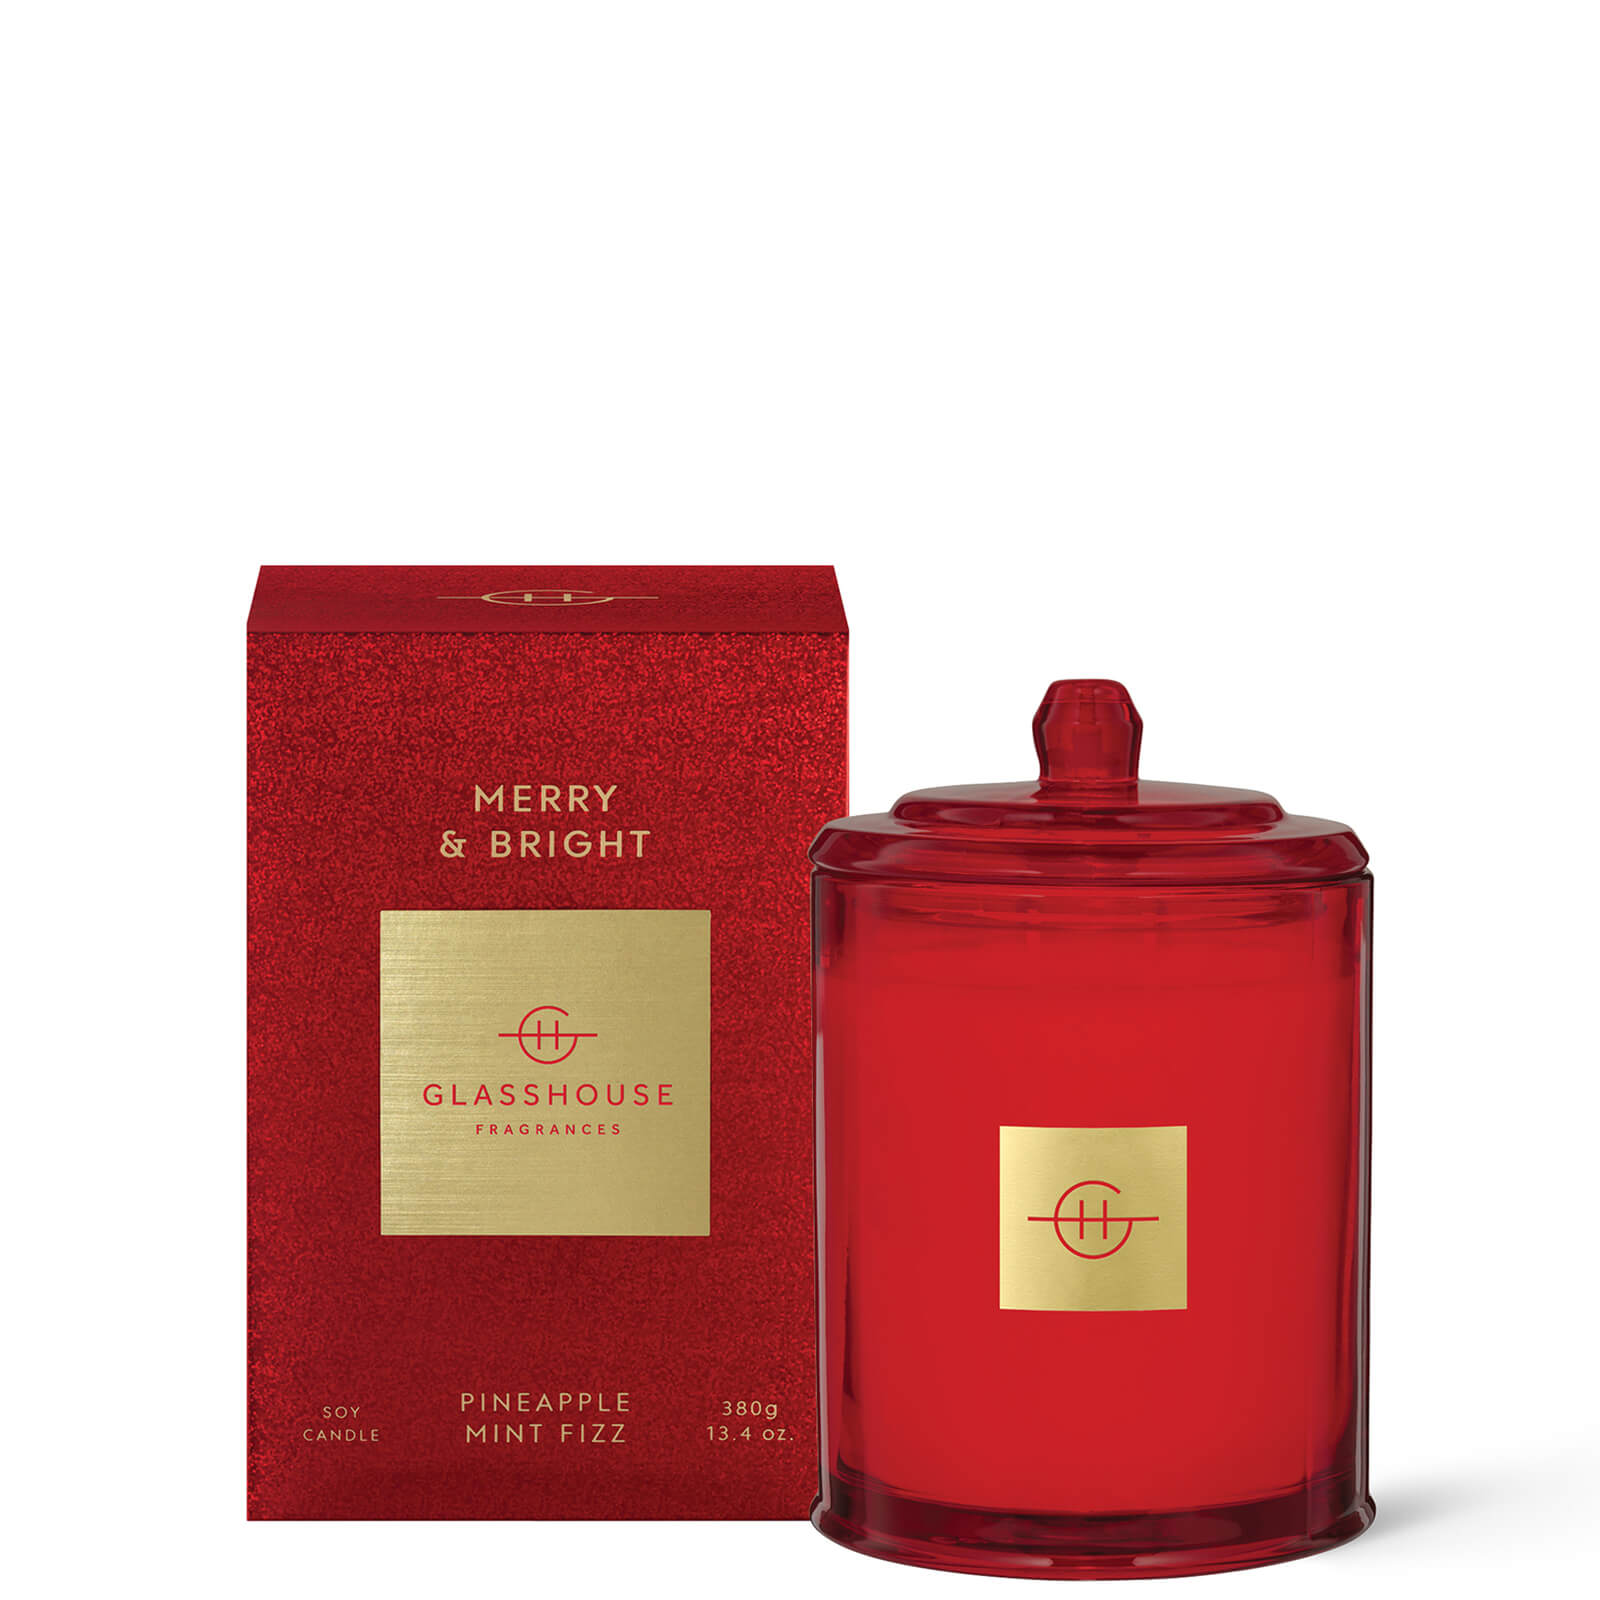 Glasshouse Fragrances Glasshouse Christmas Merry and Bright Candle 380g